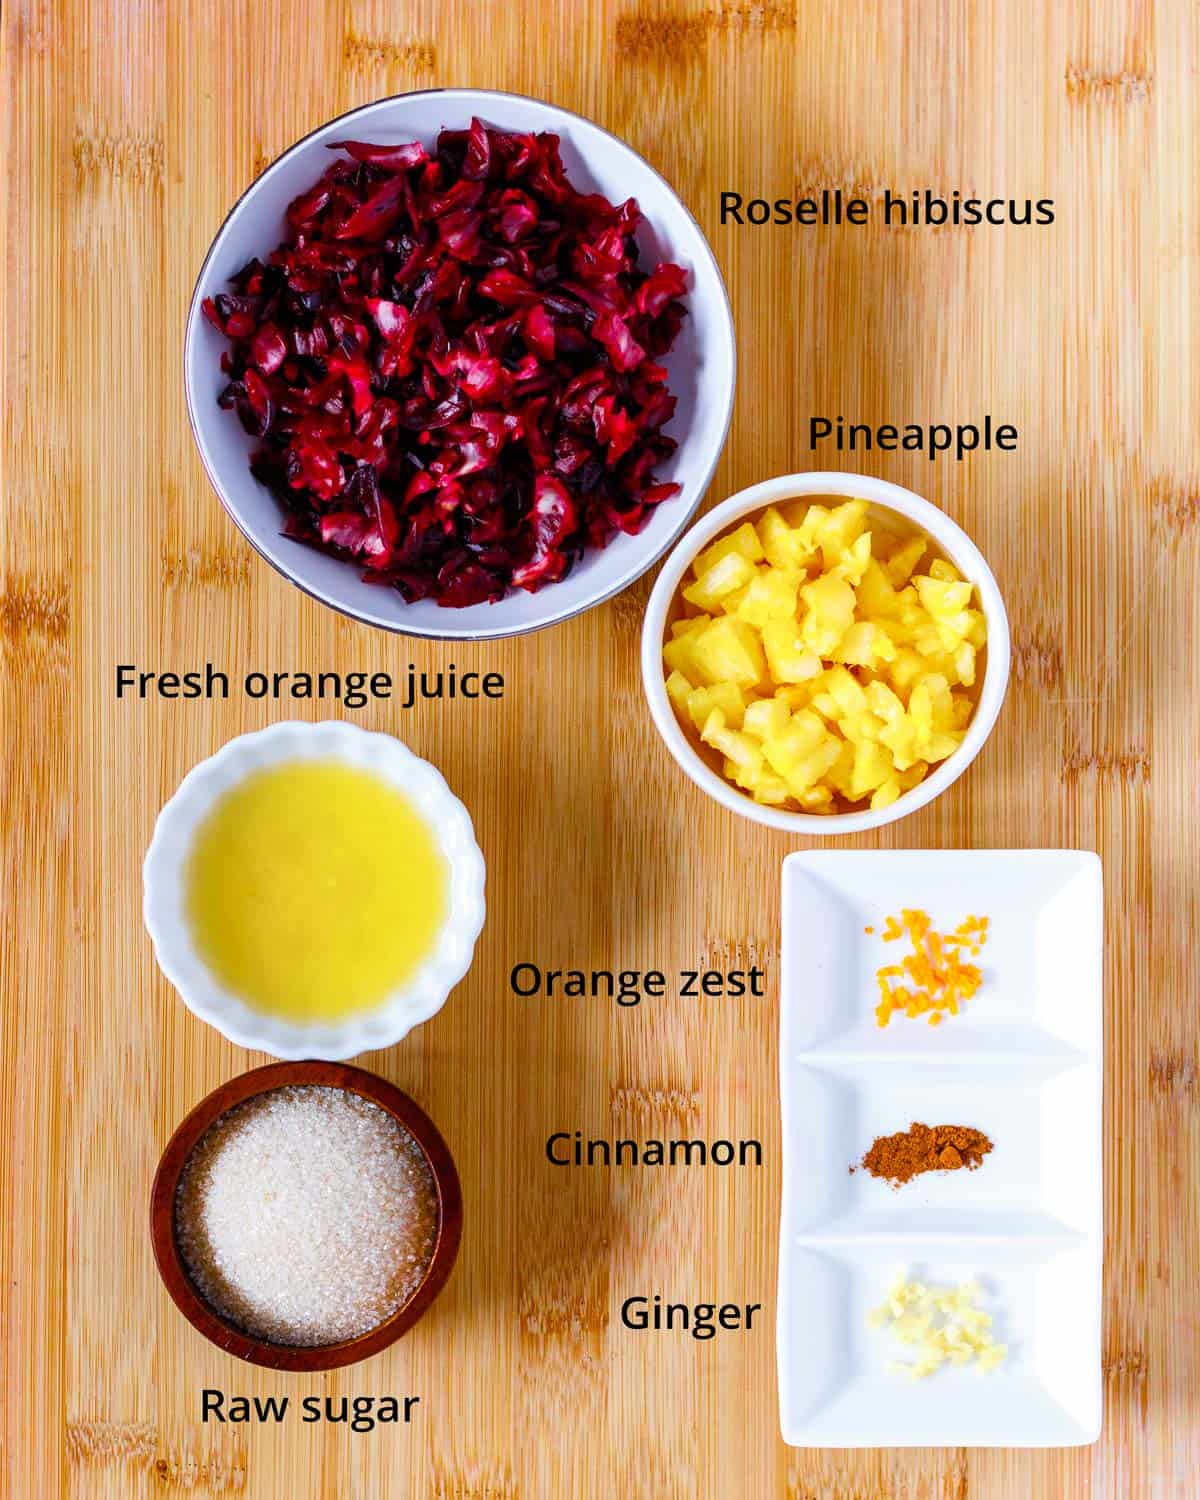 Ingredients to make cranberry sauce with roselle, pineapple and fresh orange.